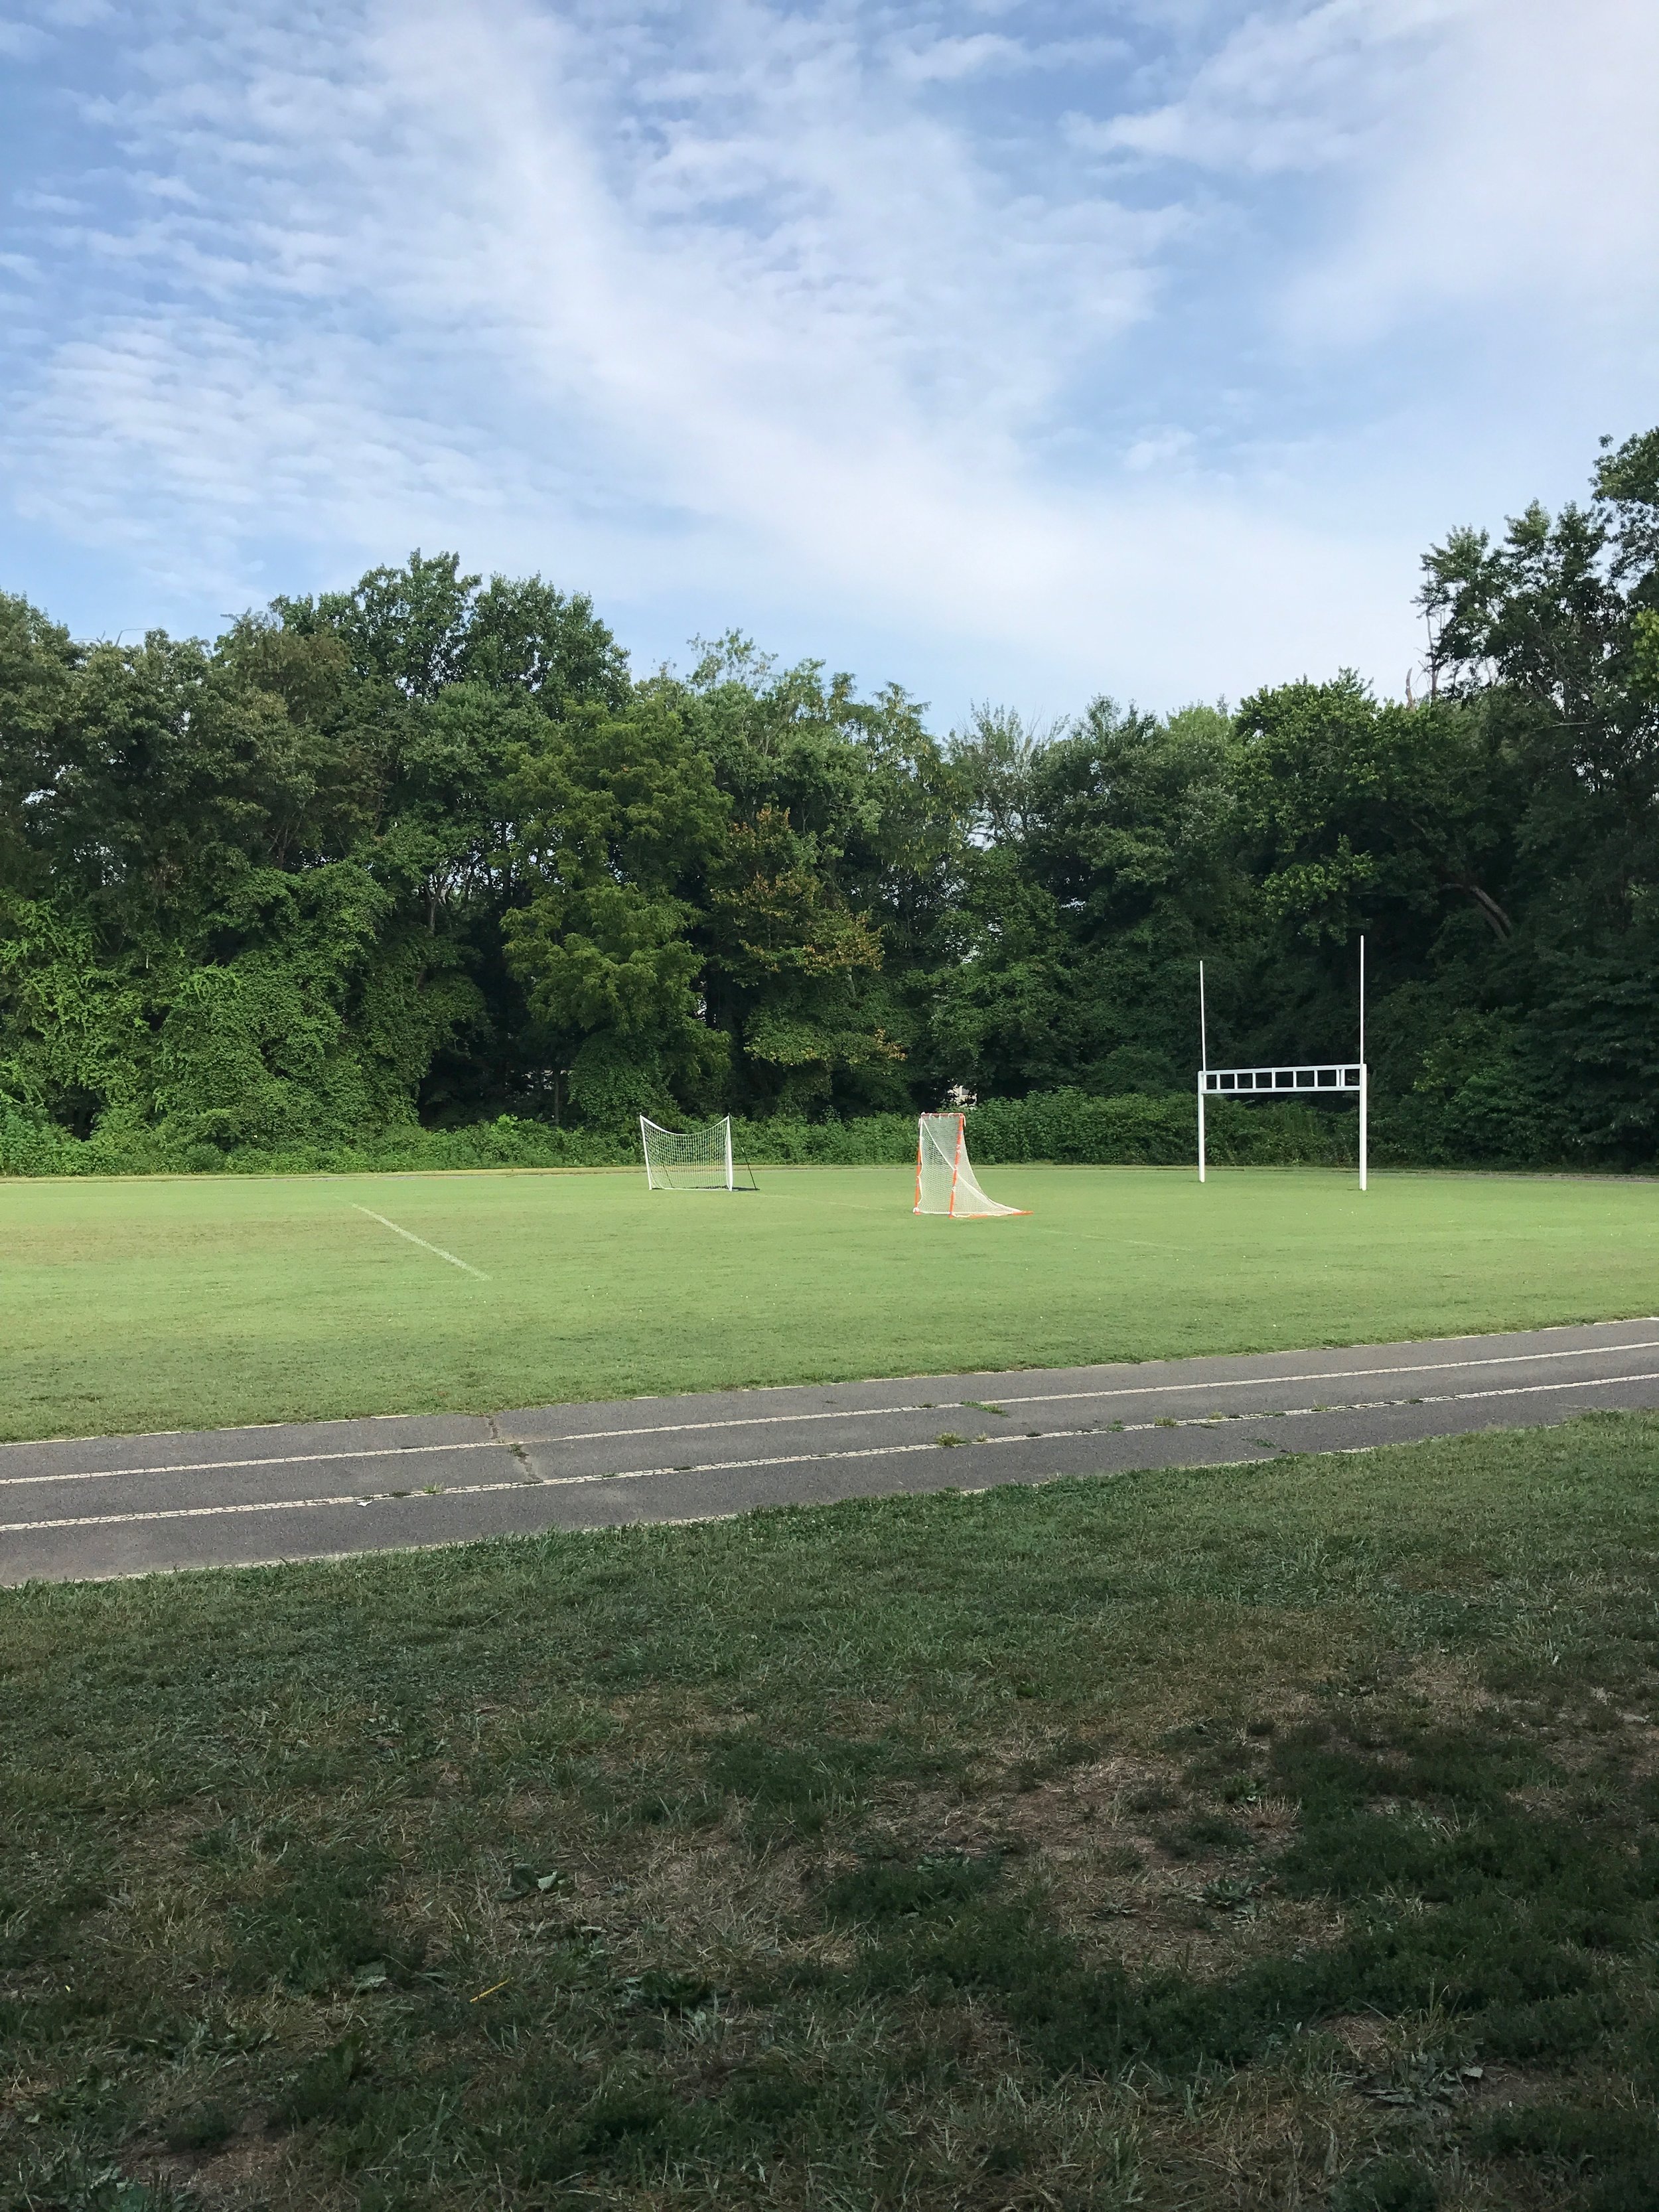  The field and goals at the Club 